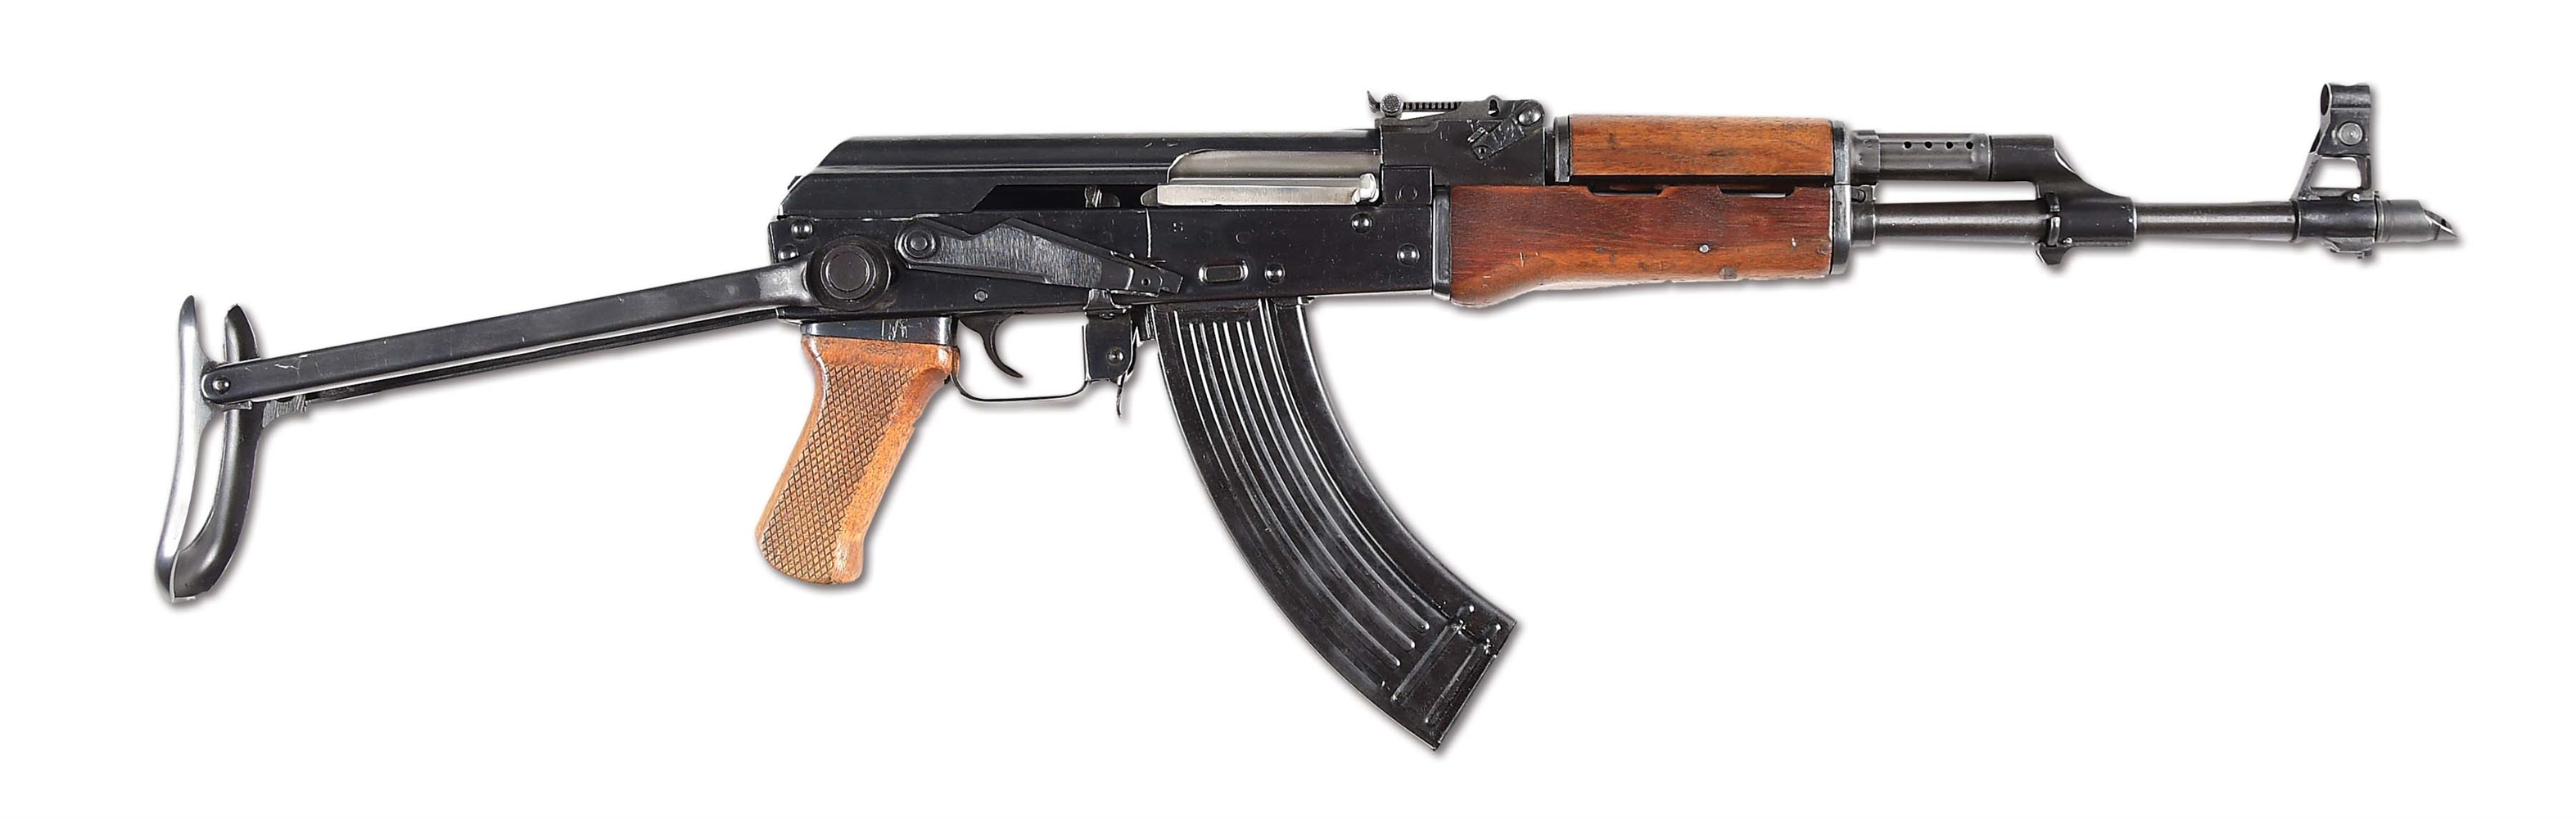 (N) GREAT POLYTECH AK-47 MACHINE GUN WITH UNDERFOLDING STOCK AS CONVERTED BY SWD MANUFACTURING TO 7.62 X 39MM (FULLY TRANSFERABLE).